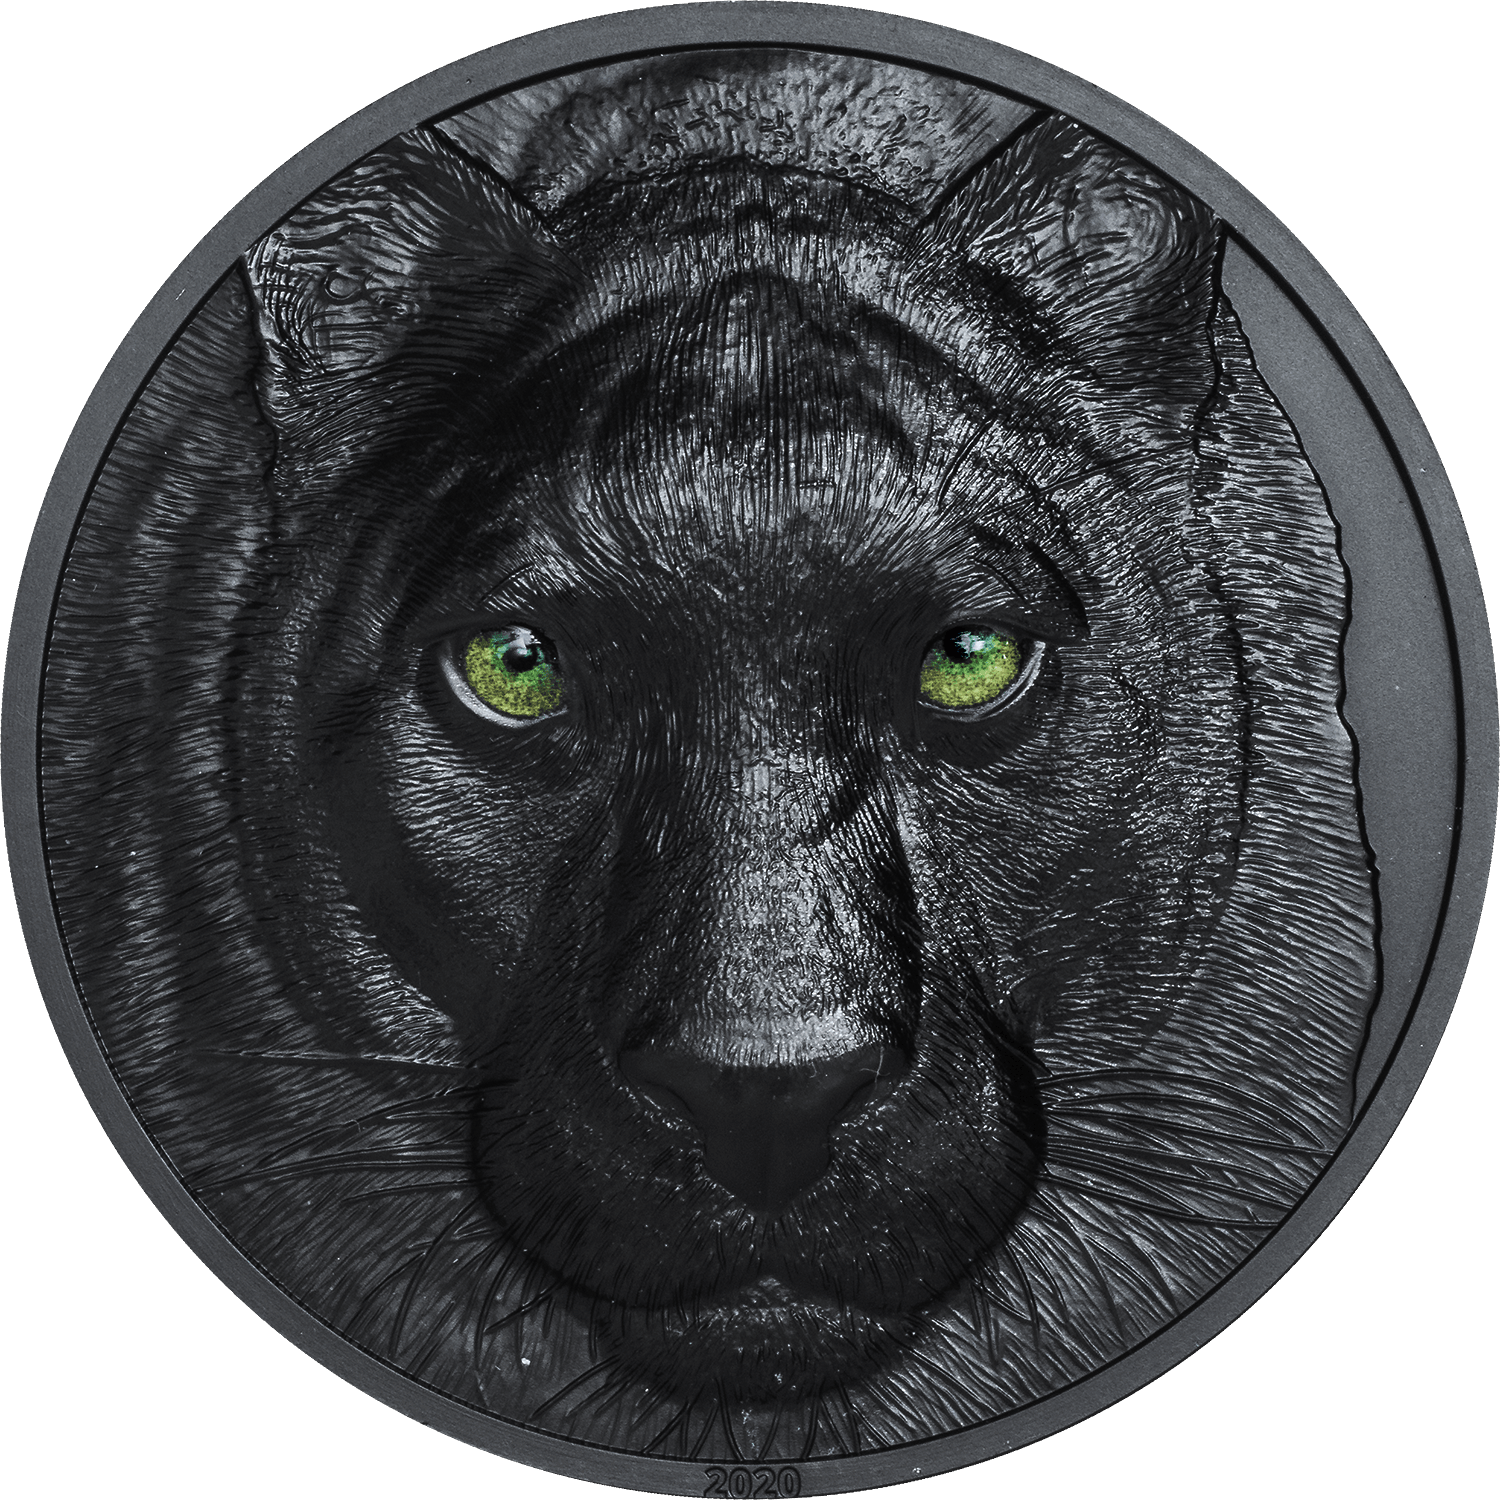 BLACK PANTHER Hunters by Night 2 Oz Silver Coin $10 Palau 2020 - PARTHAVA COIN